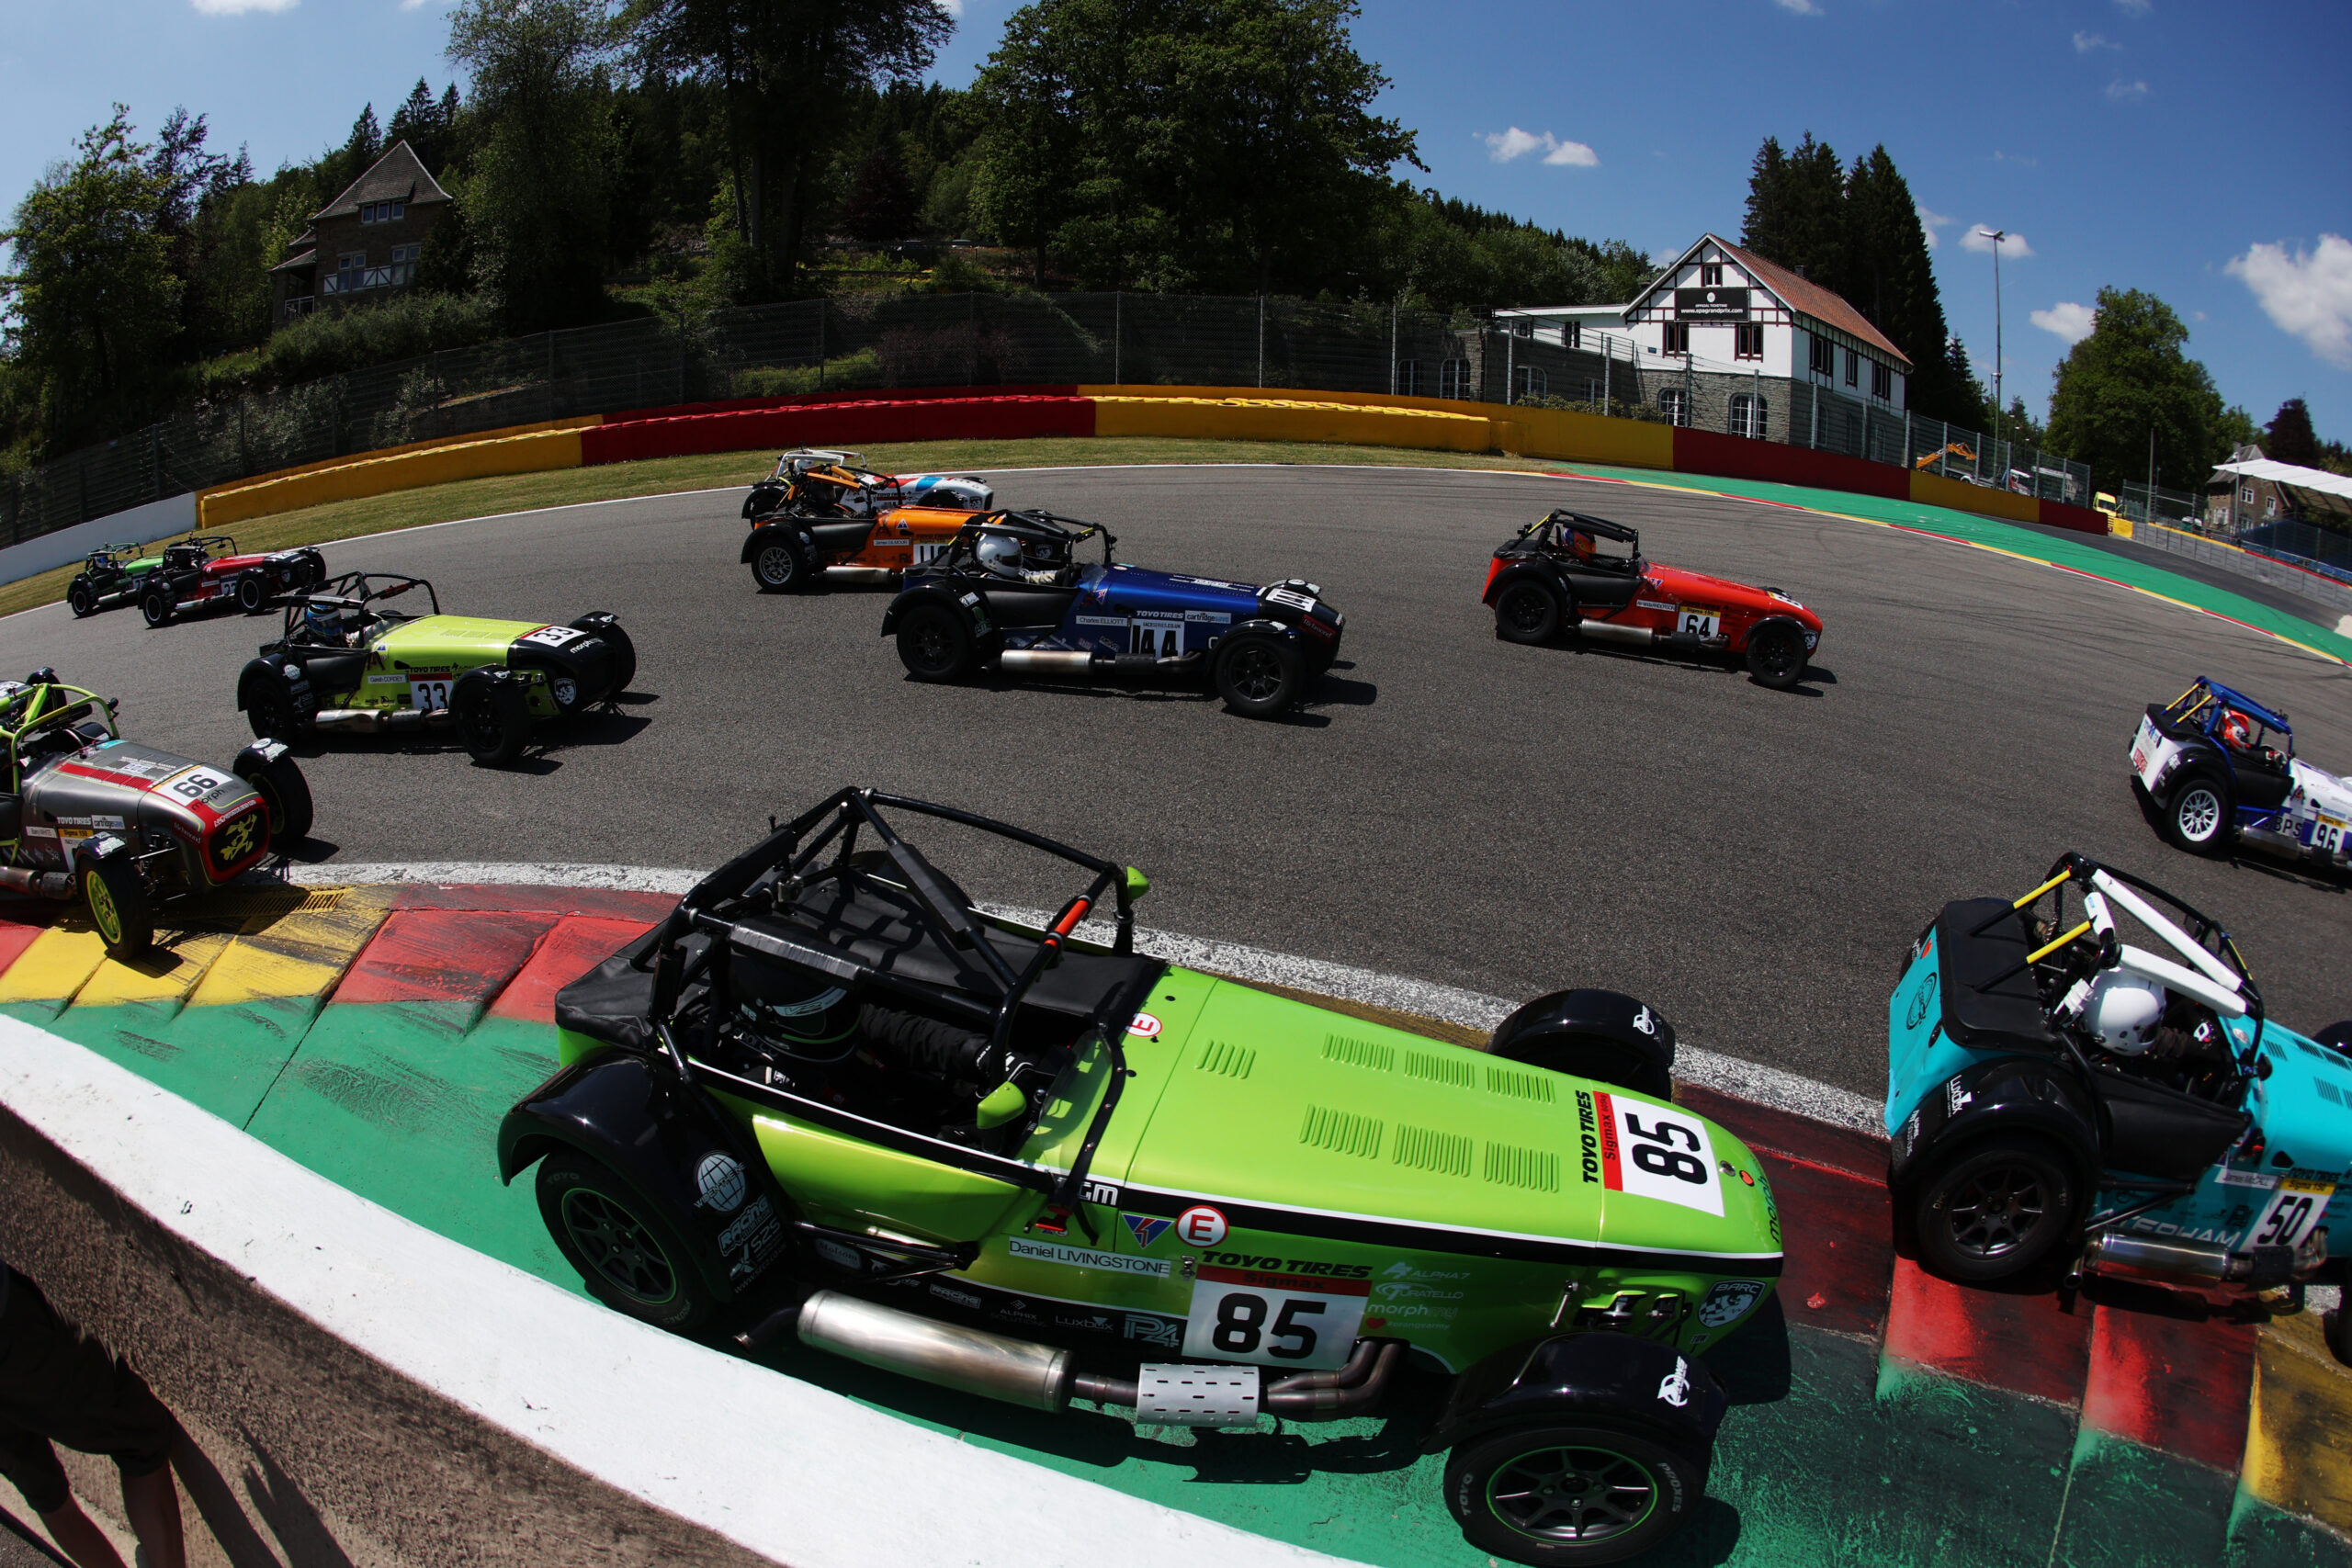 RP-X™-Equipped Caterham Racer Secures Two Podiums at Spa